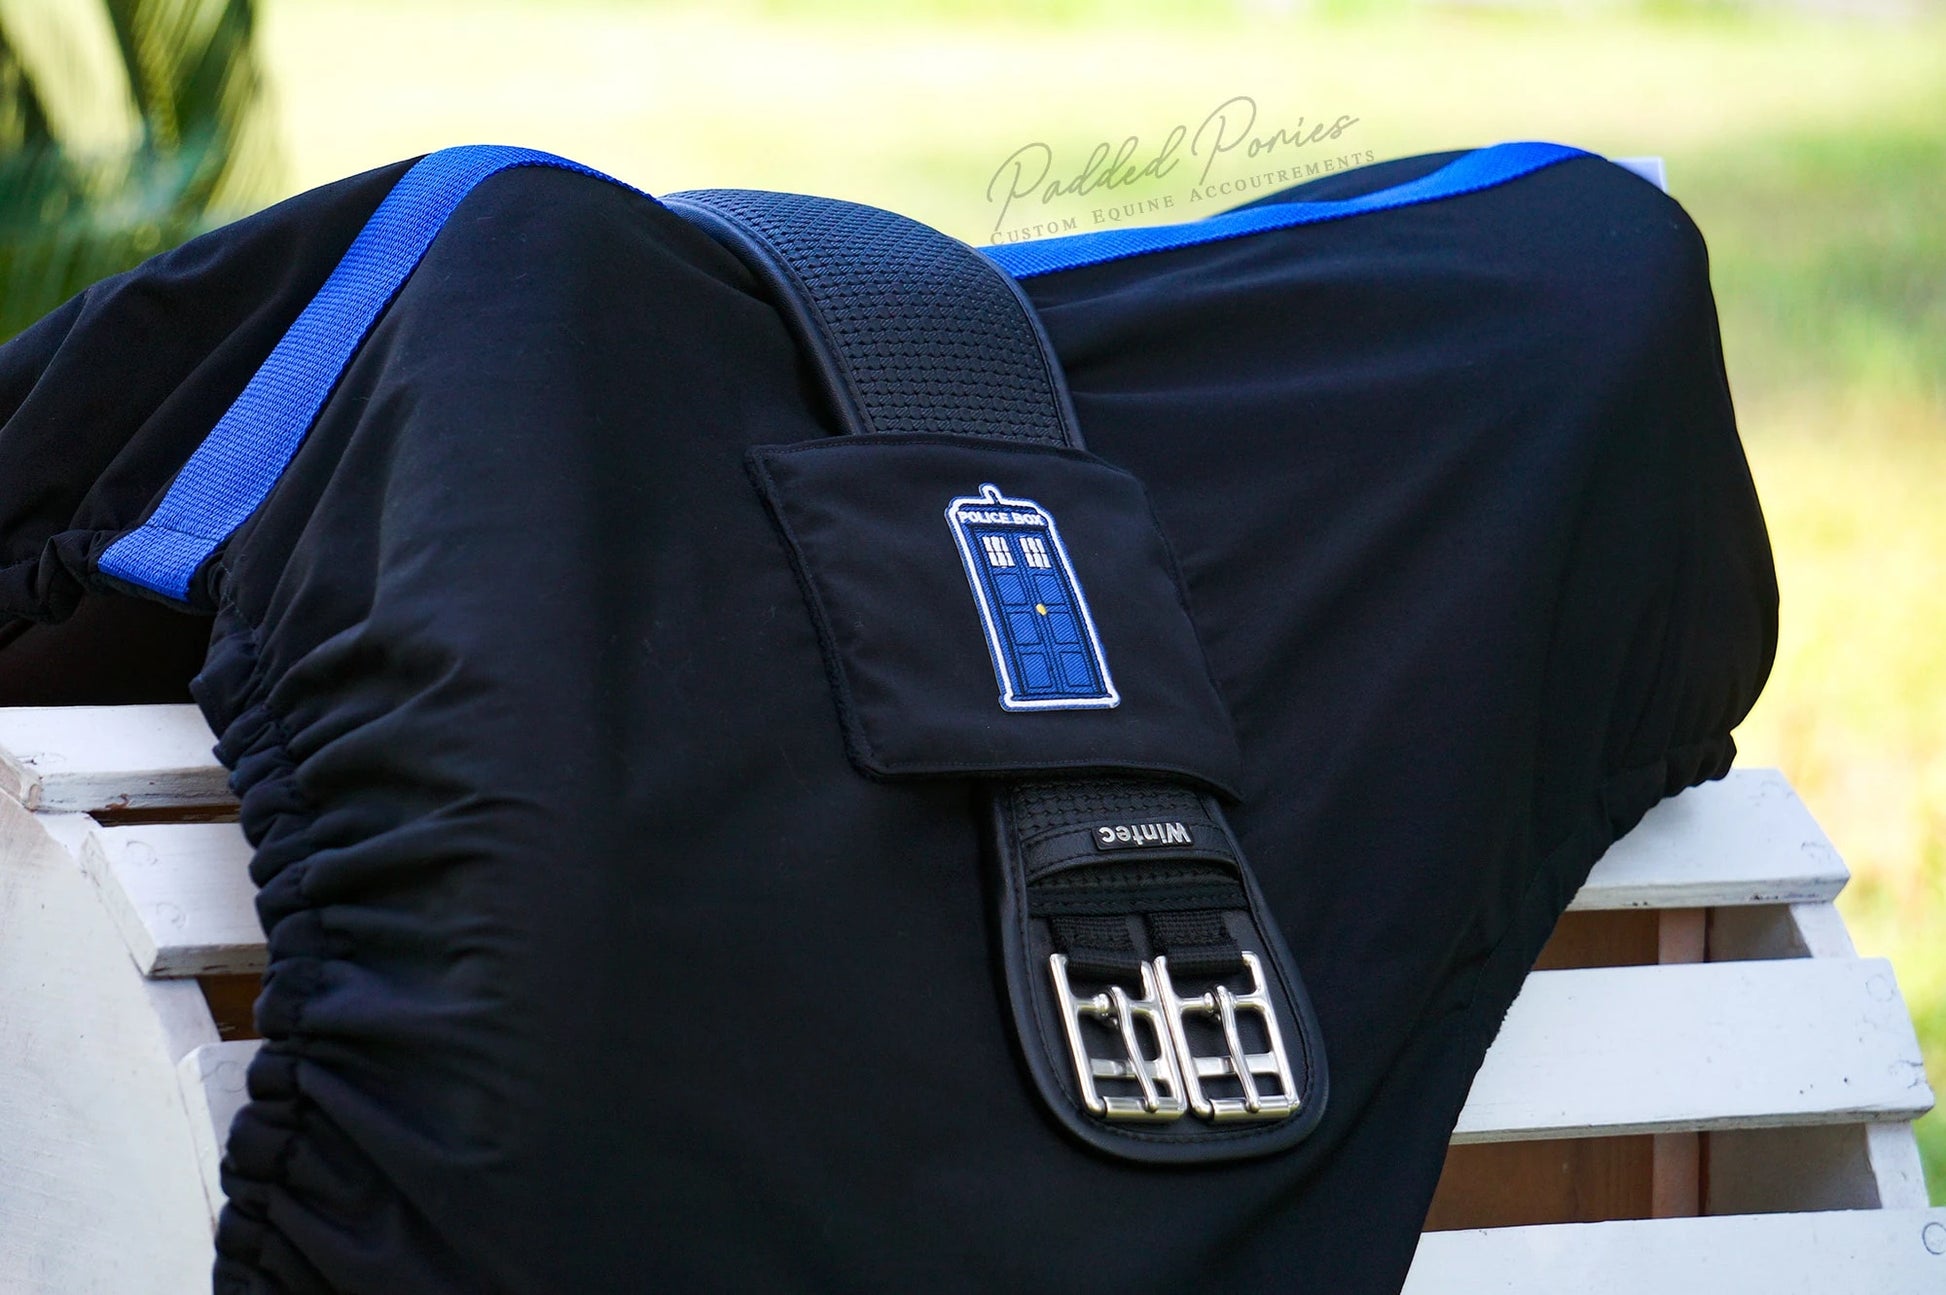 Black and Blue Doctor Who Tardis Patch All Purpose Saddle Cover with Girth Holder Pocket